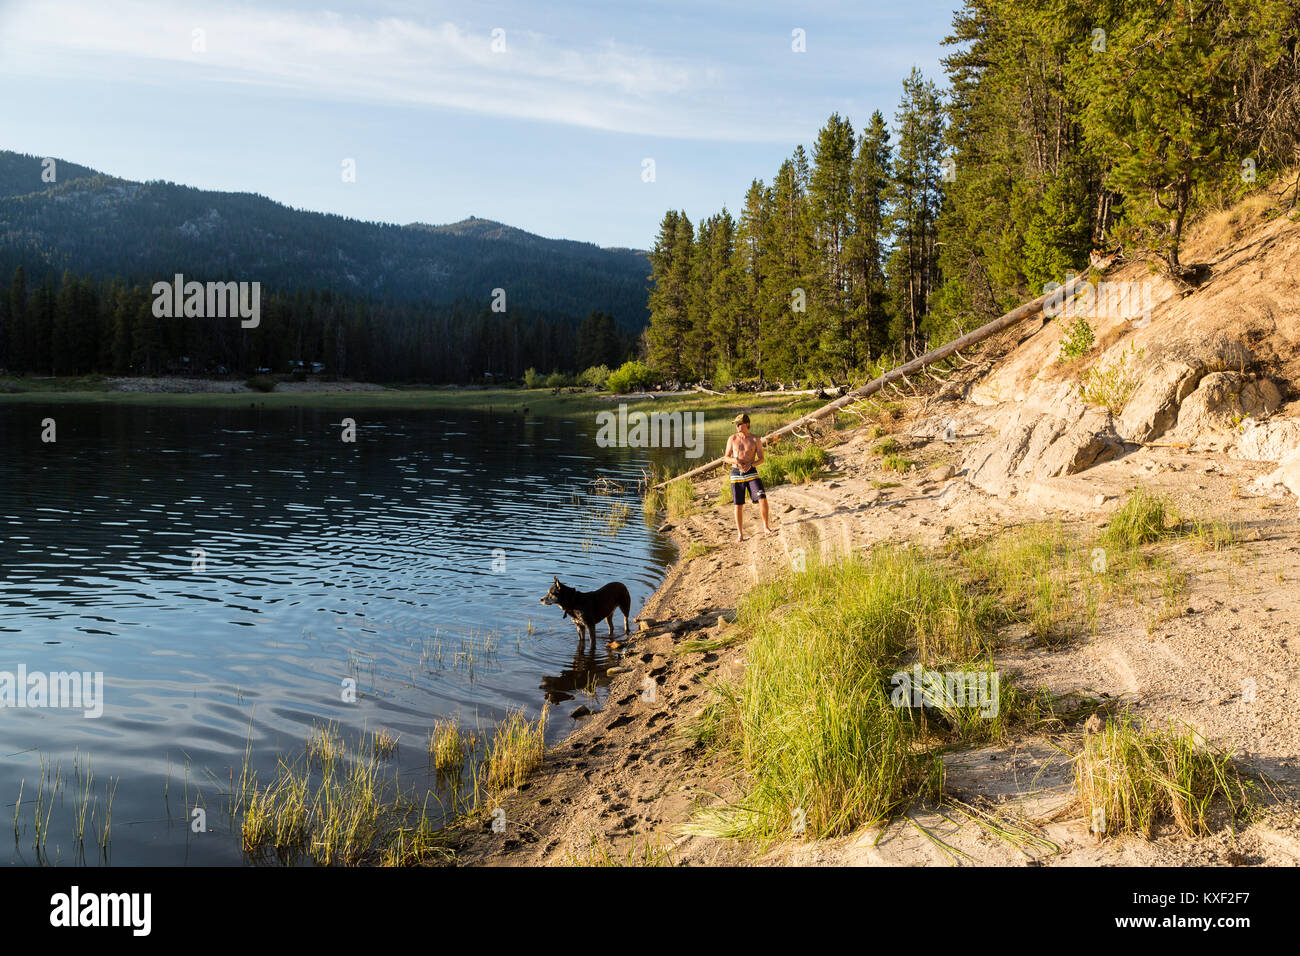 A man fishes from the shore of Deadwood Reservoir in Boise National Forest while is dog looks on. Stock Photo